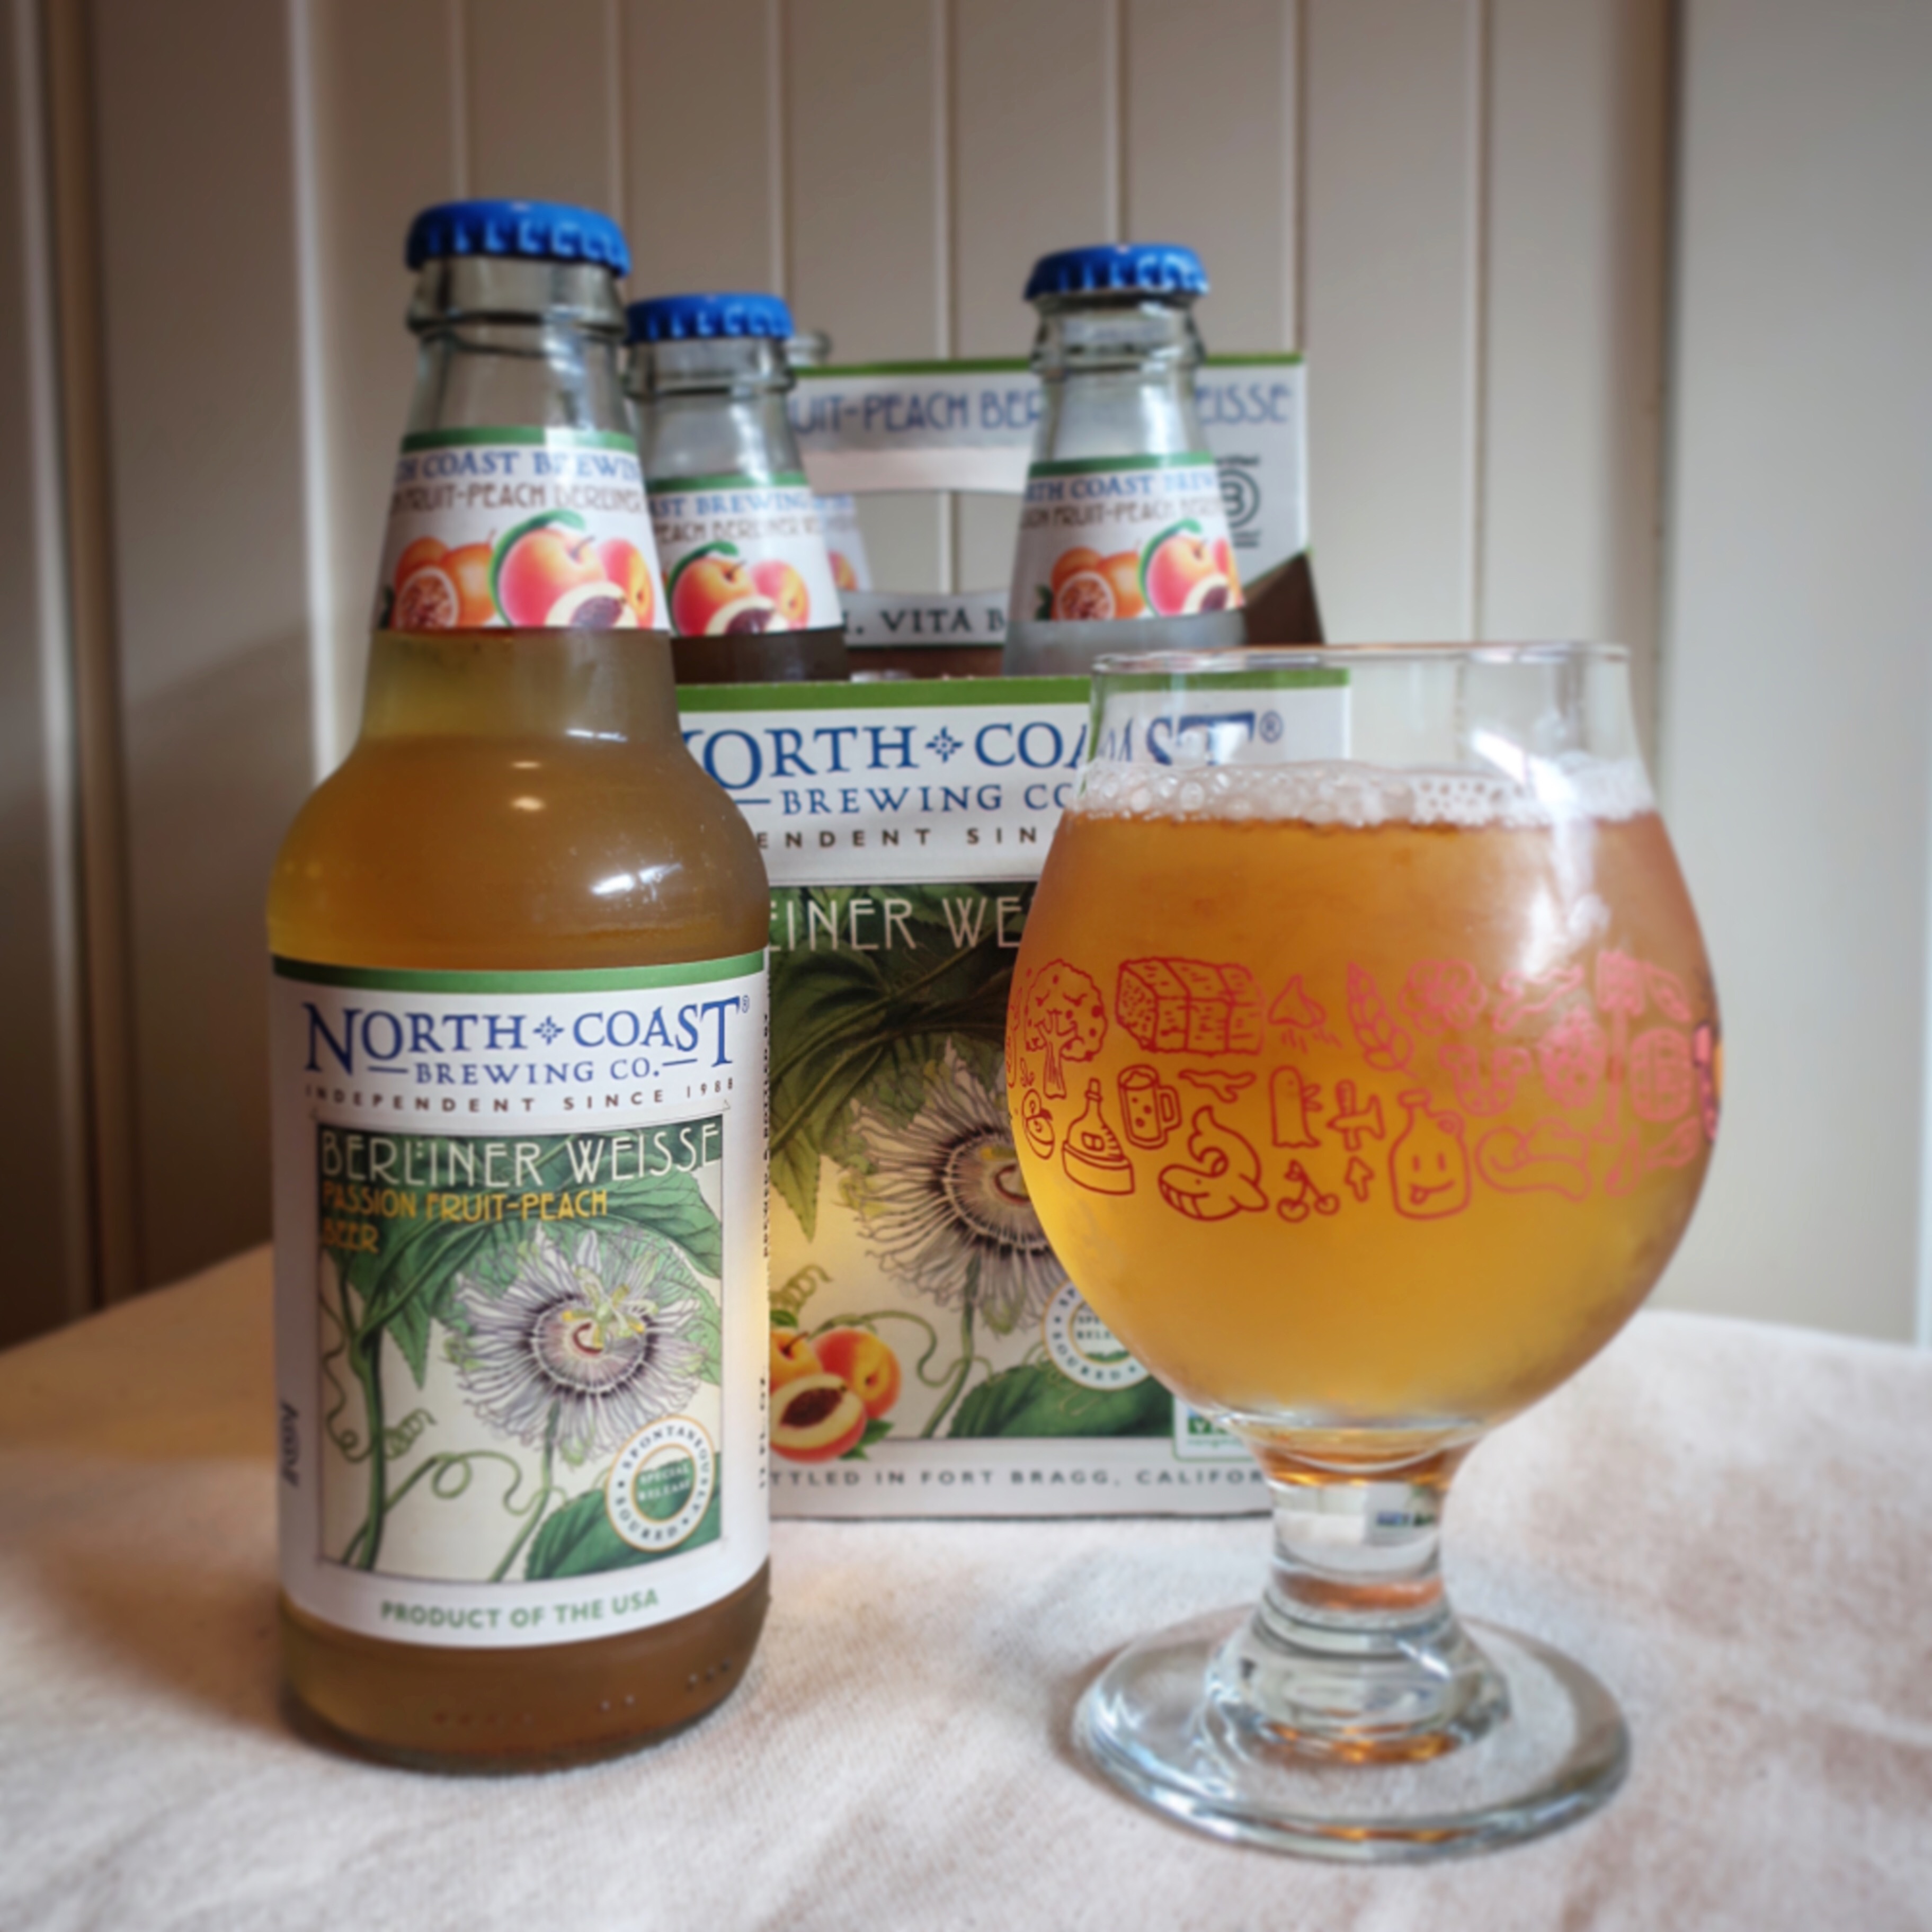 Passion Fruit-Peach Berliner Weisse from North Coast Brewing Co.